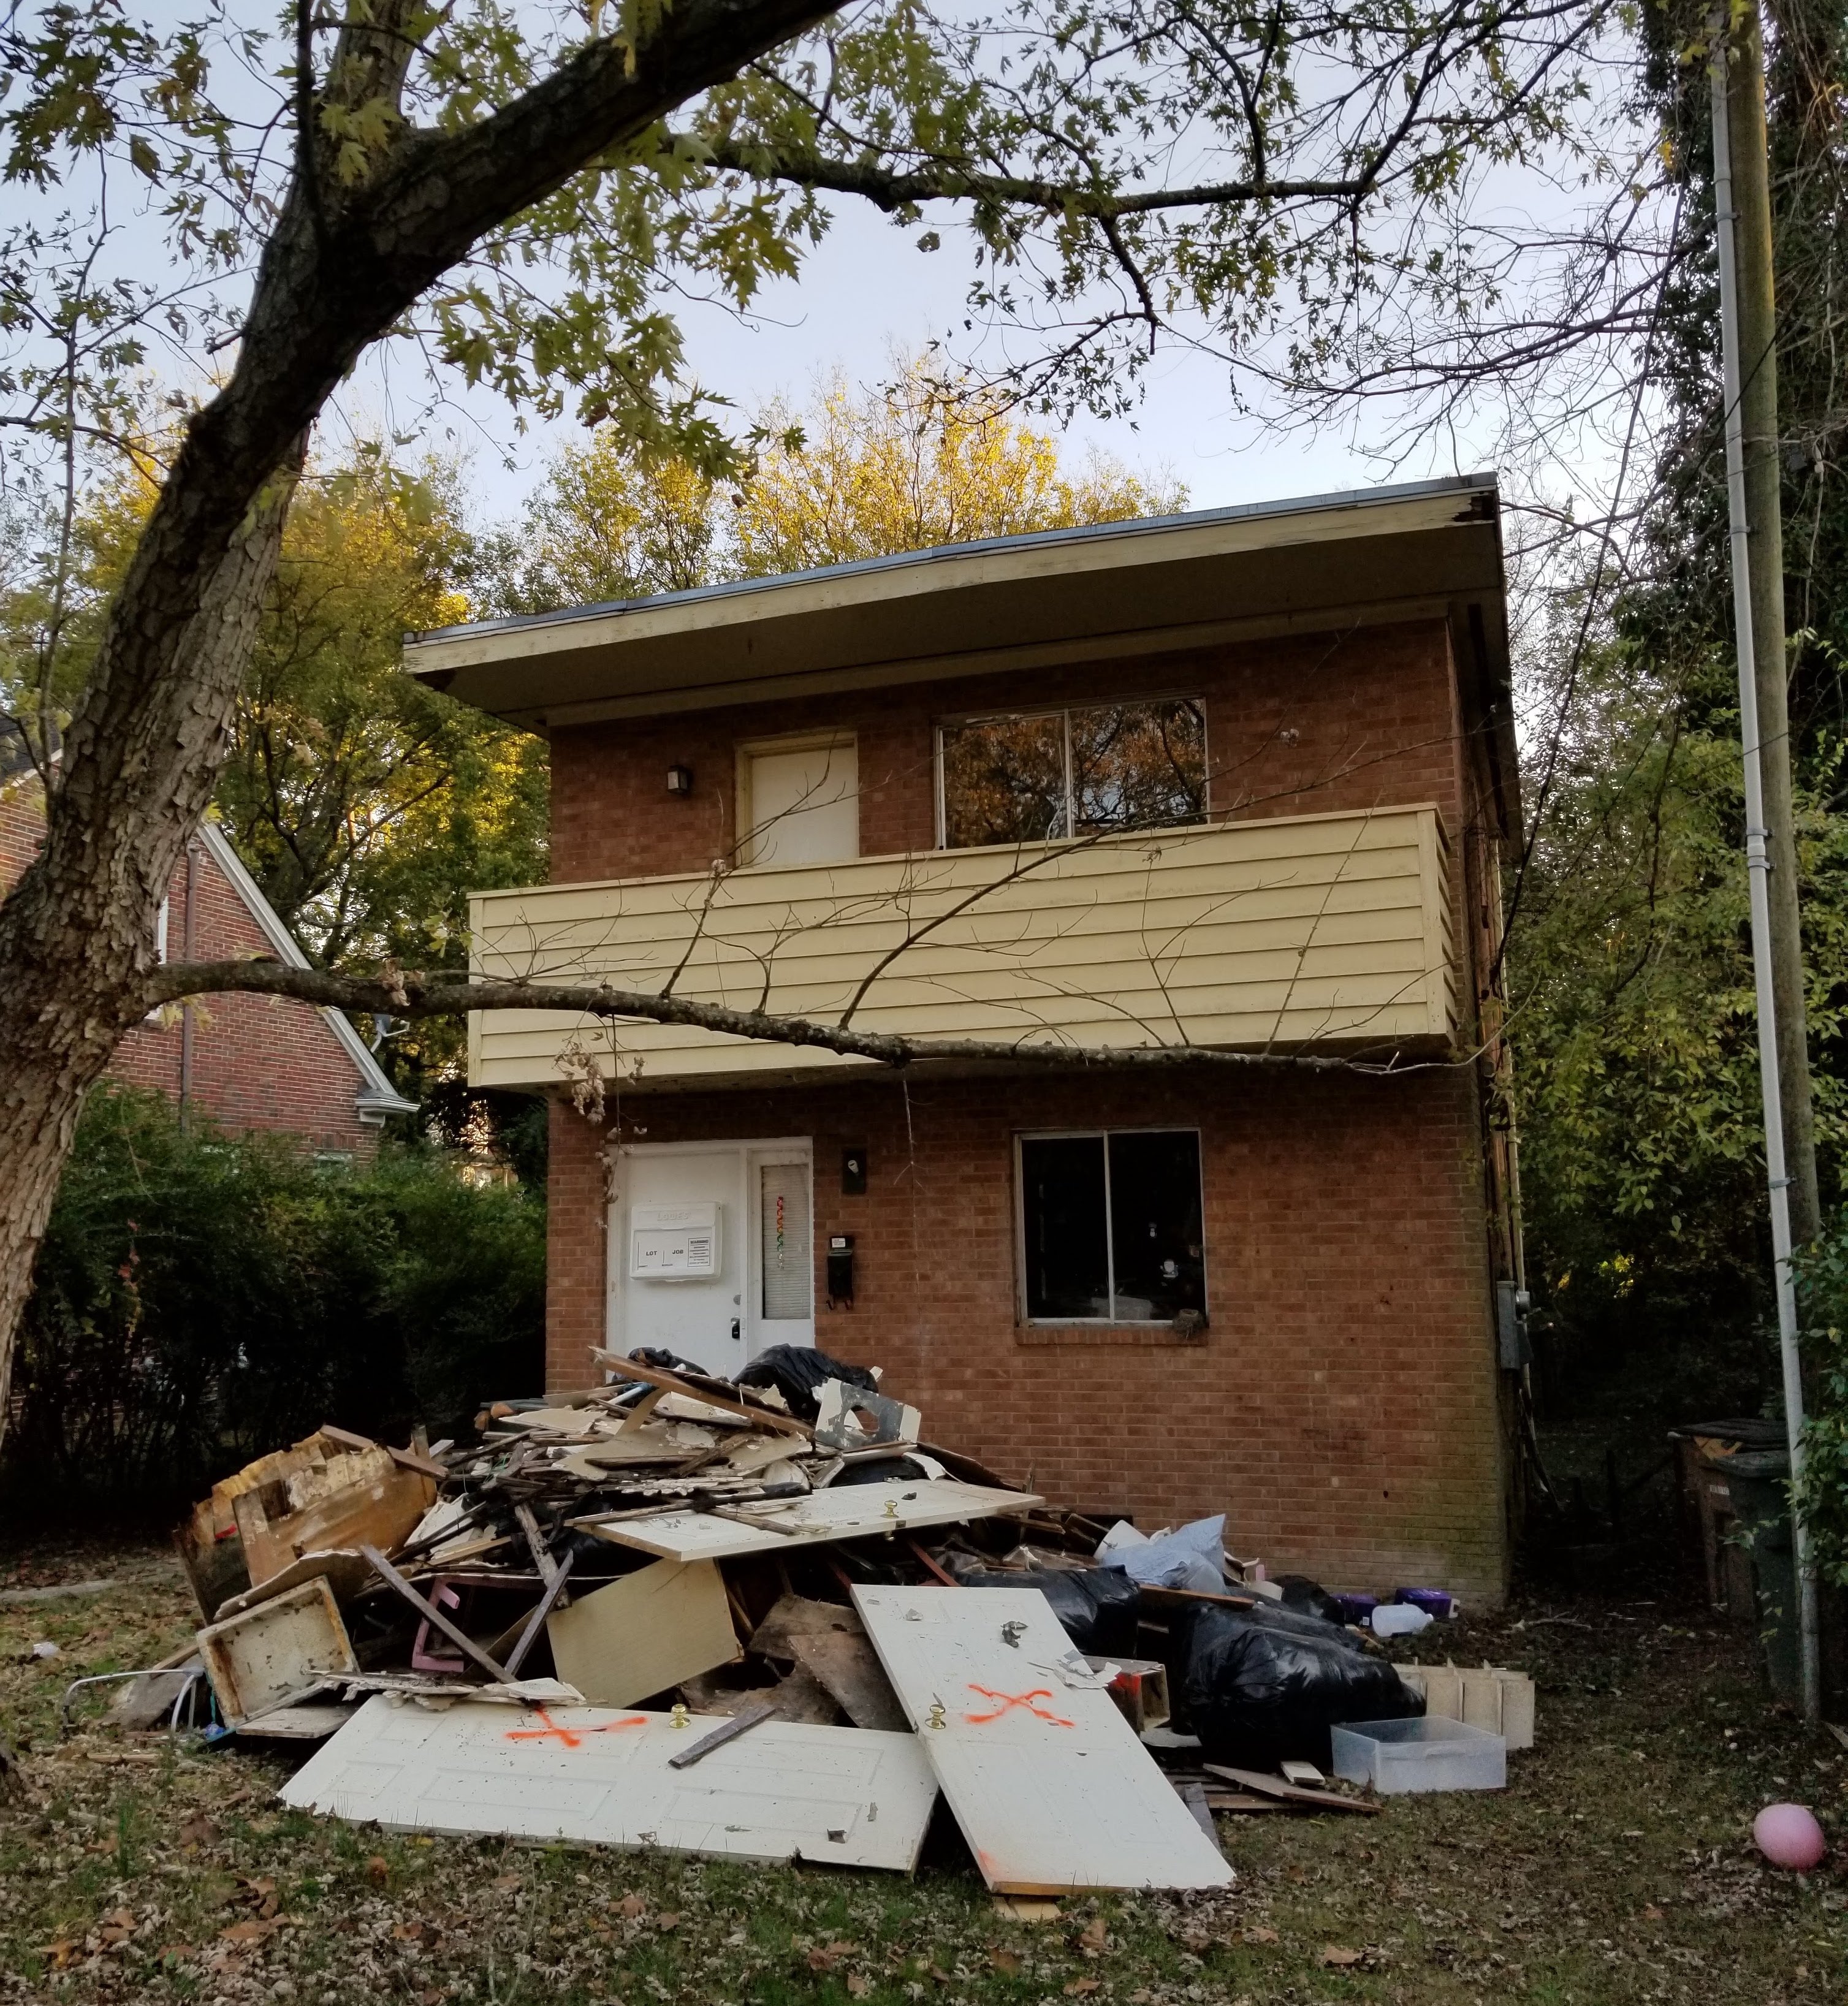 the same house, with a large pile of debris in the front yard